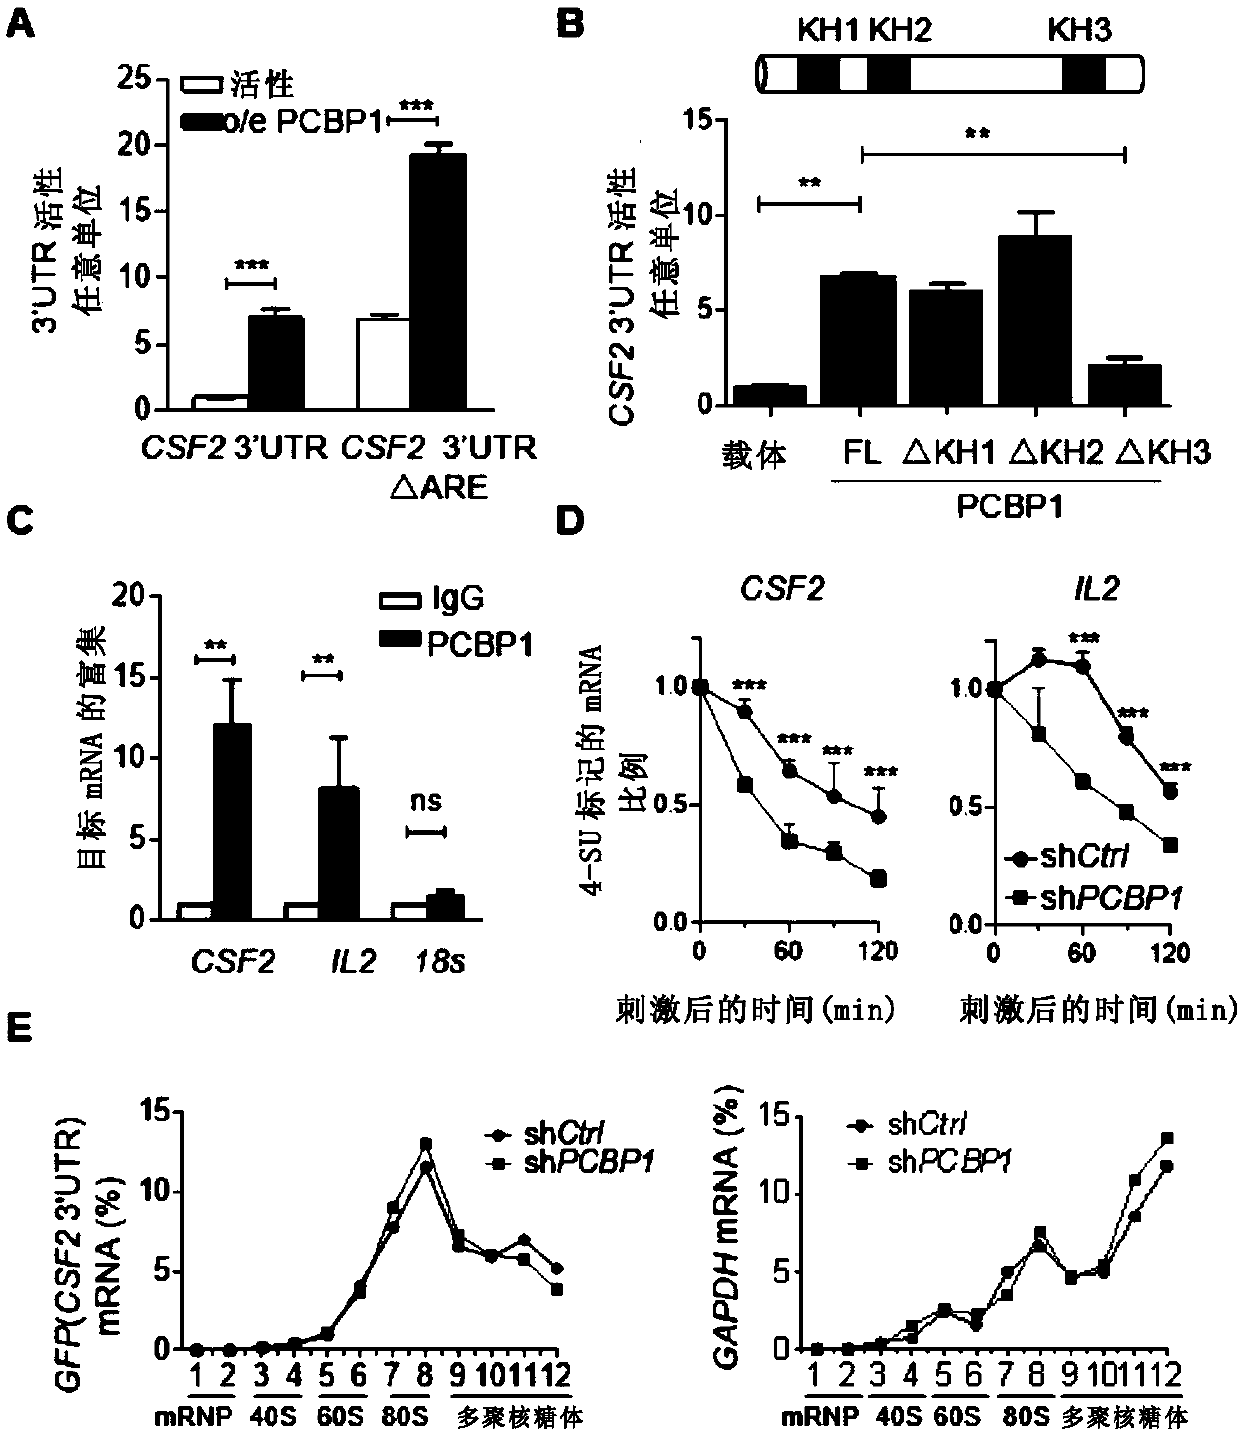 Application of poly(C)-binding protein 1 (PCBP1) gene or protein regulator thereof to immune system disease